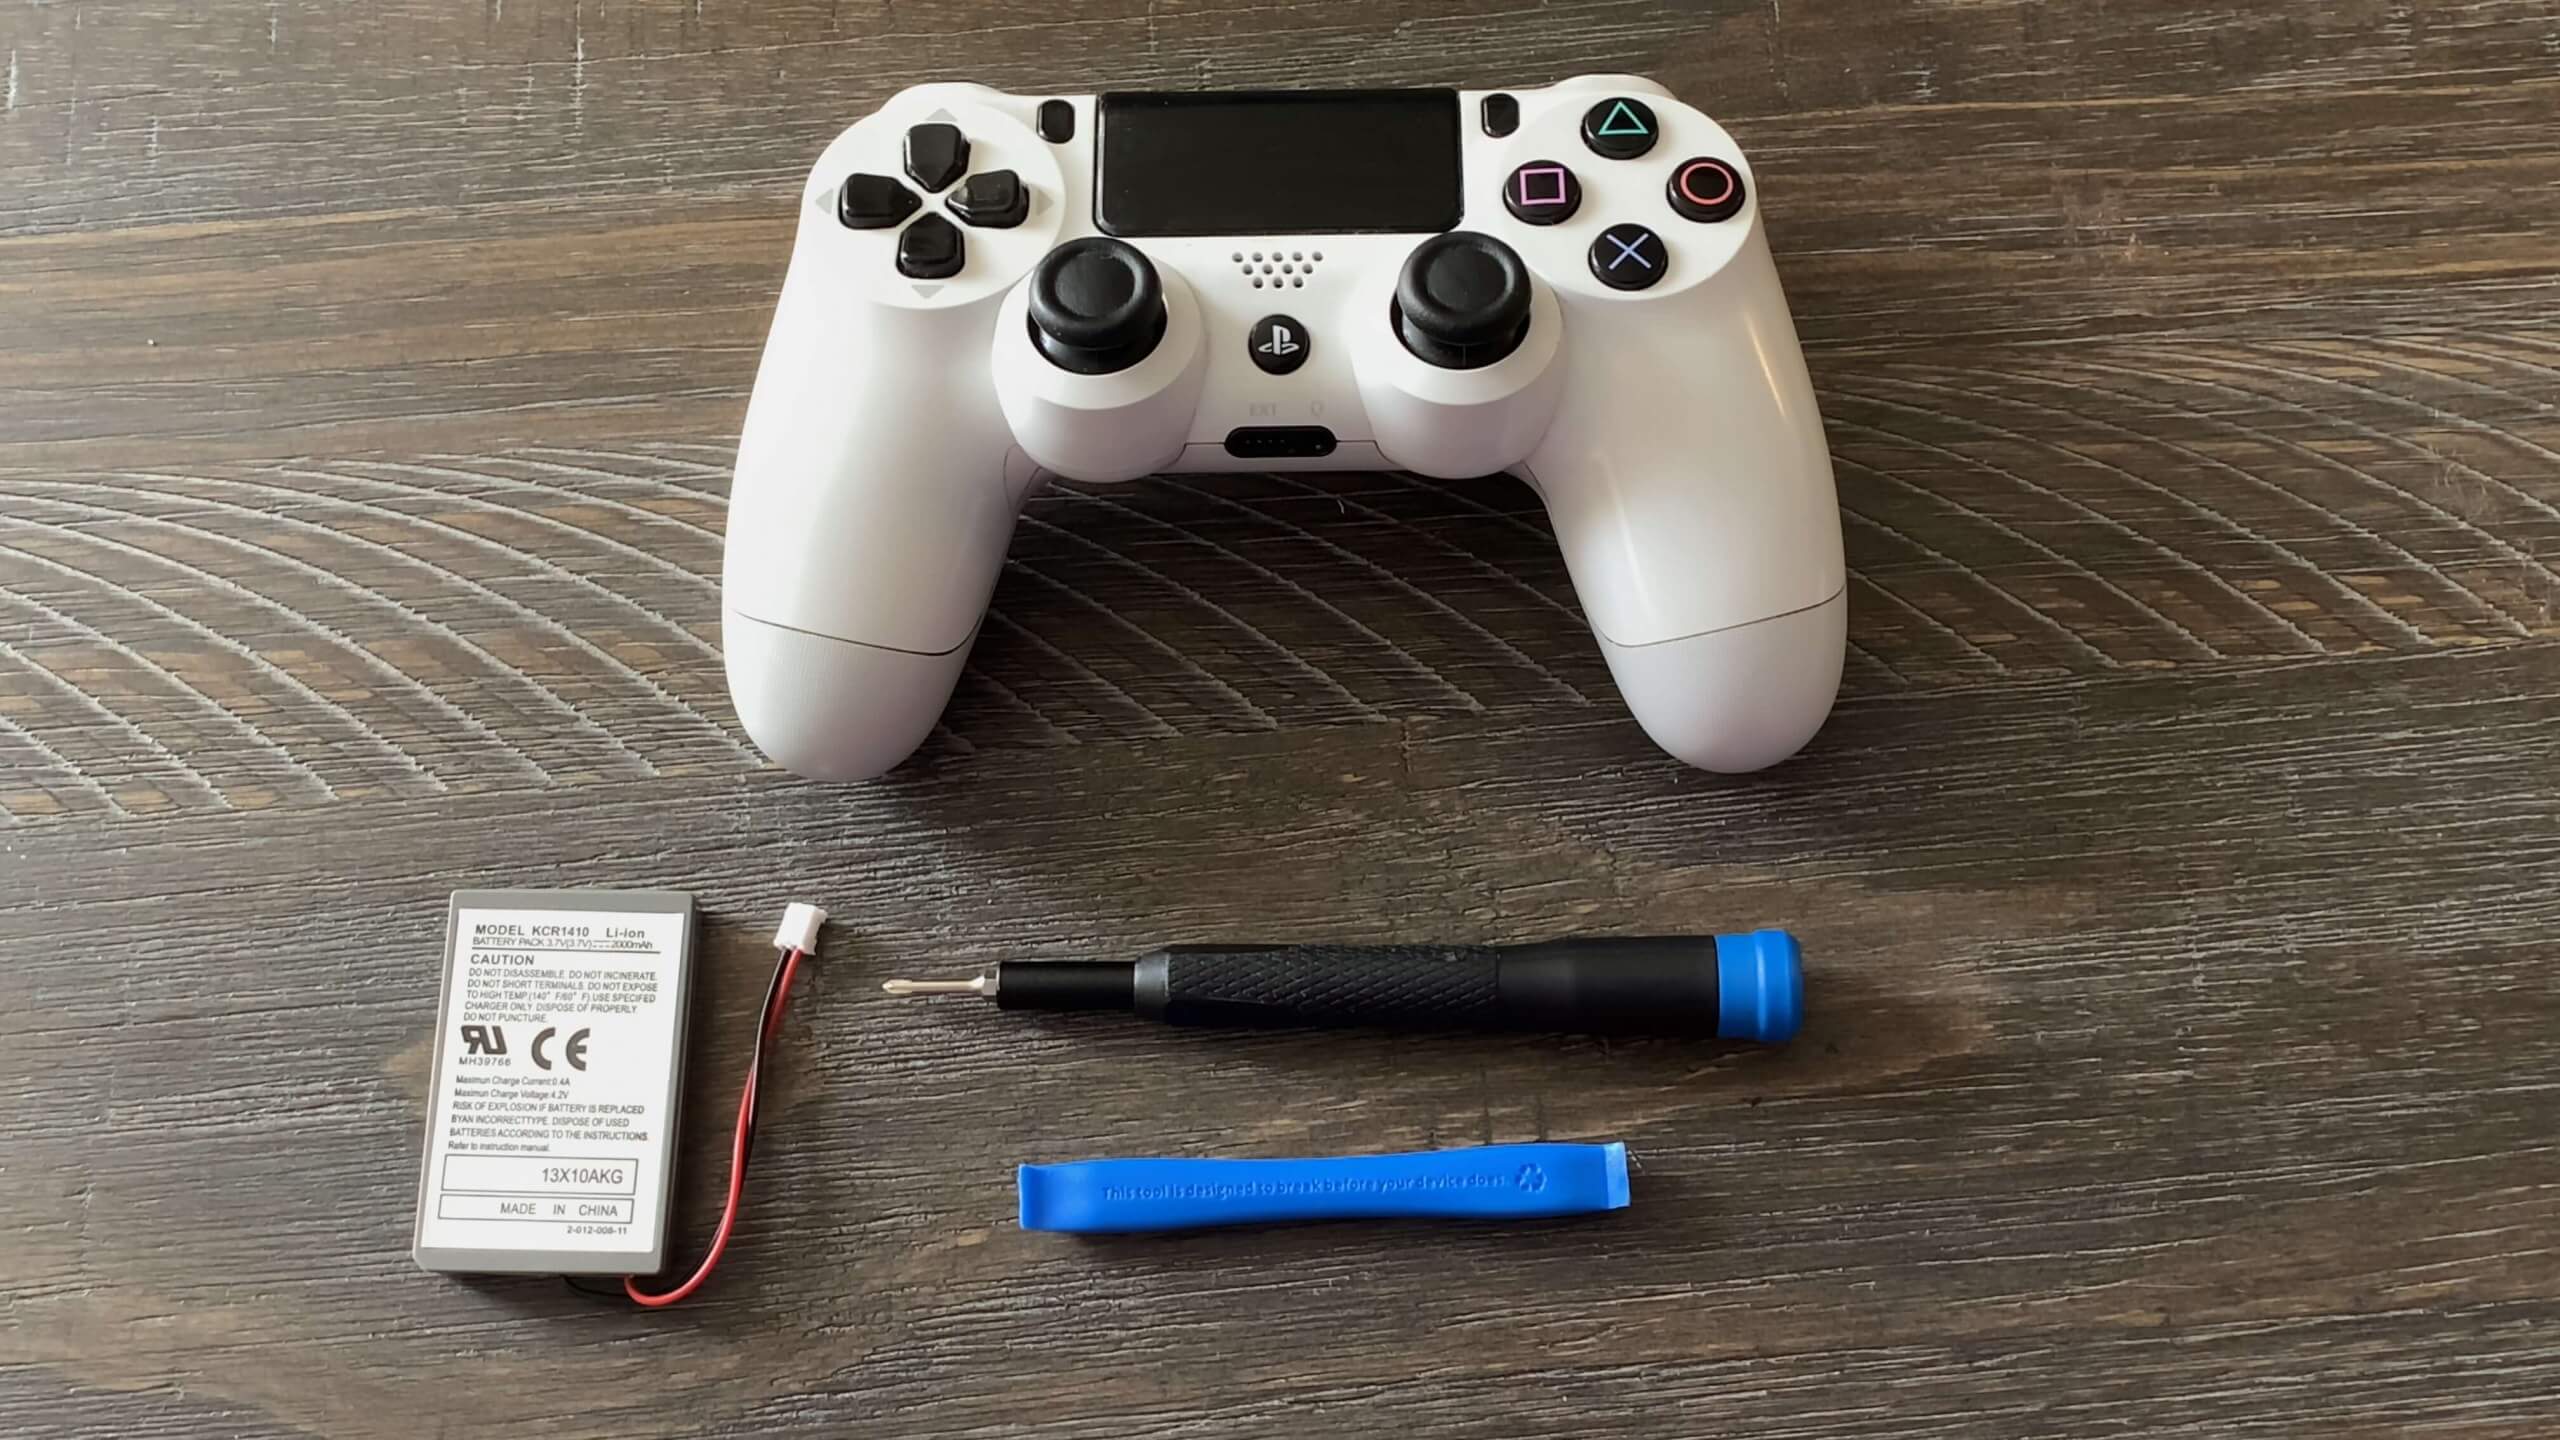 apology Petulance bus How to Replace the Battery in a DualShock 4 Controller | TechSpot